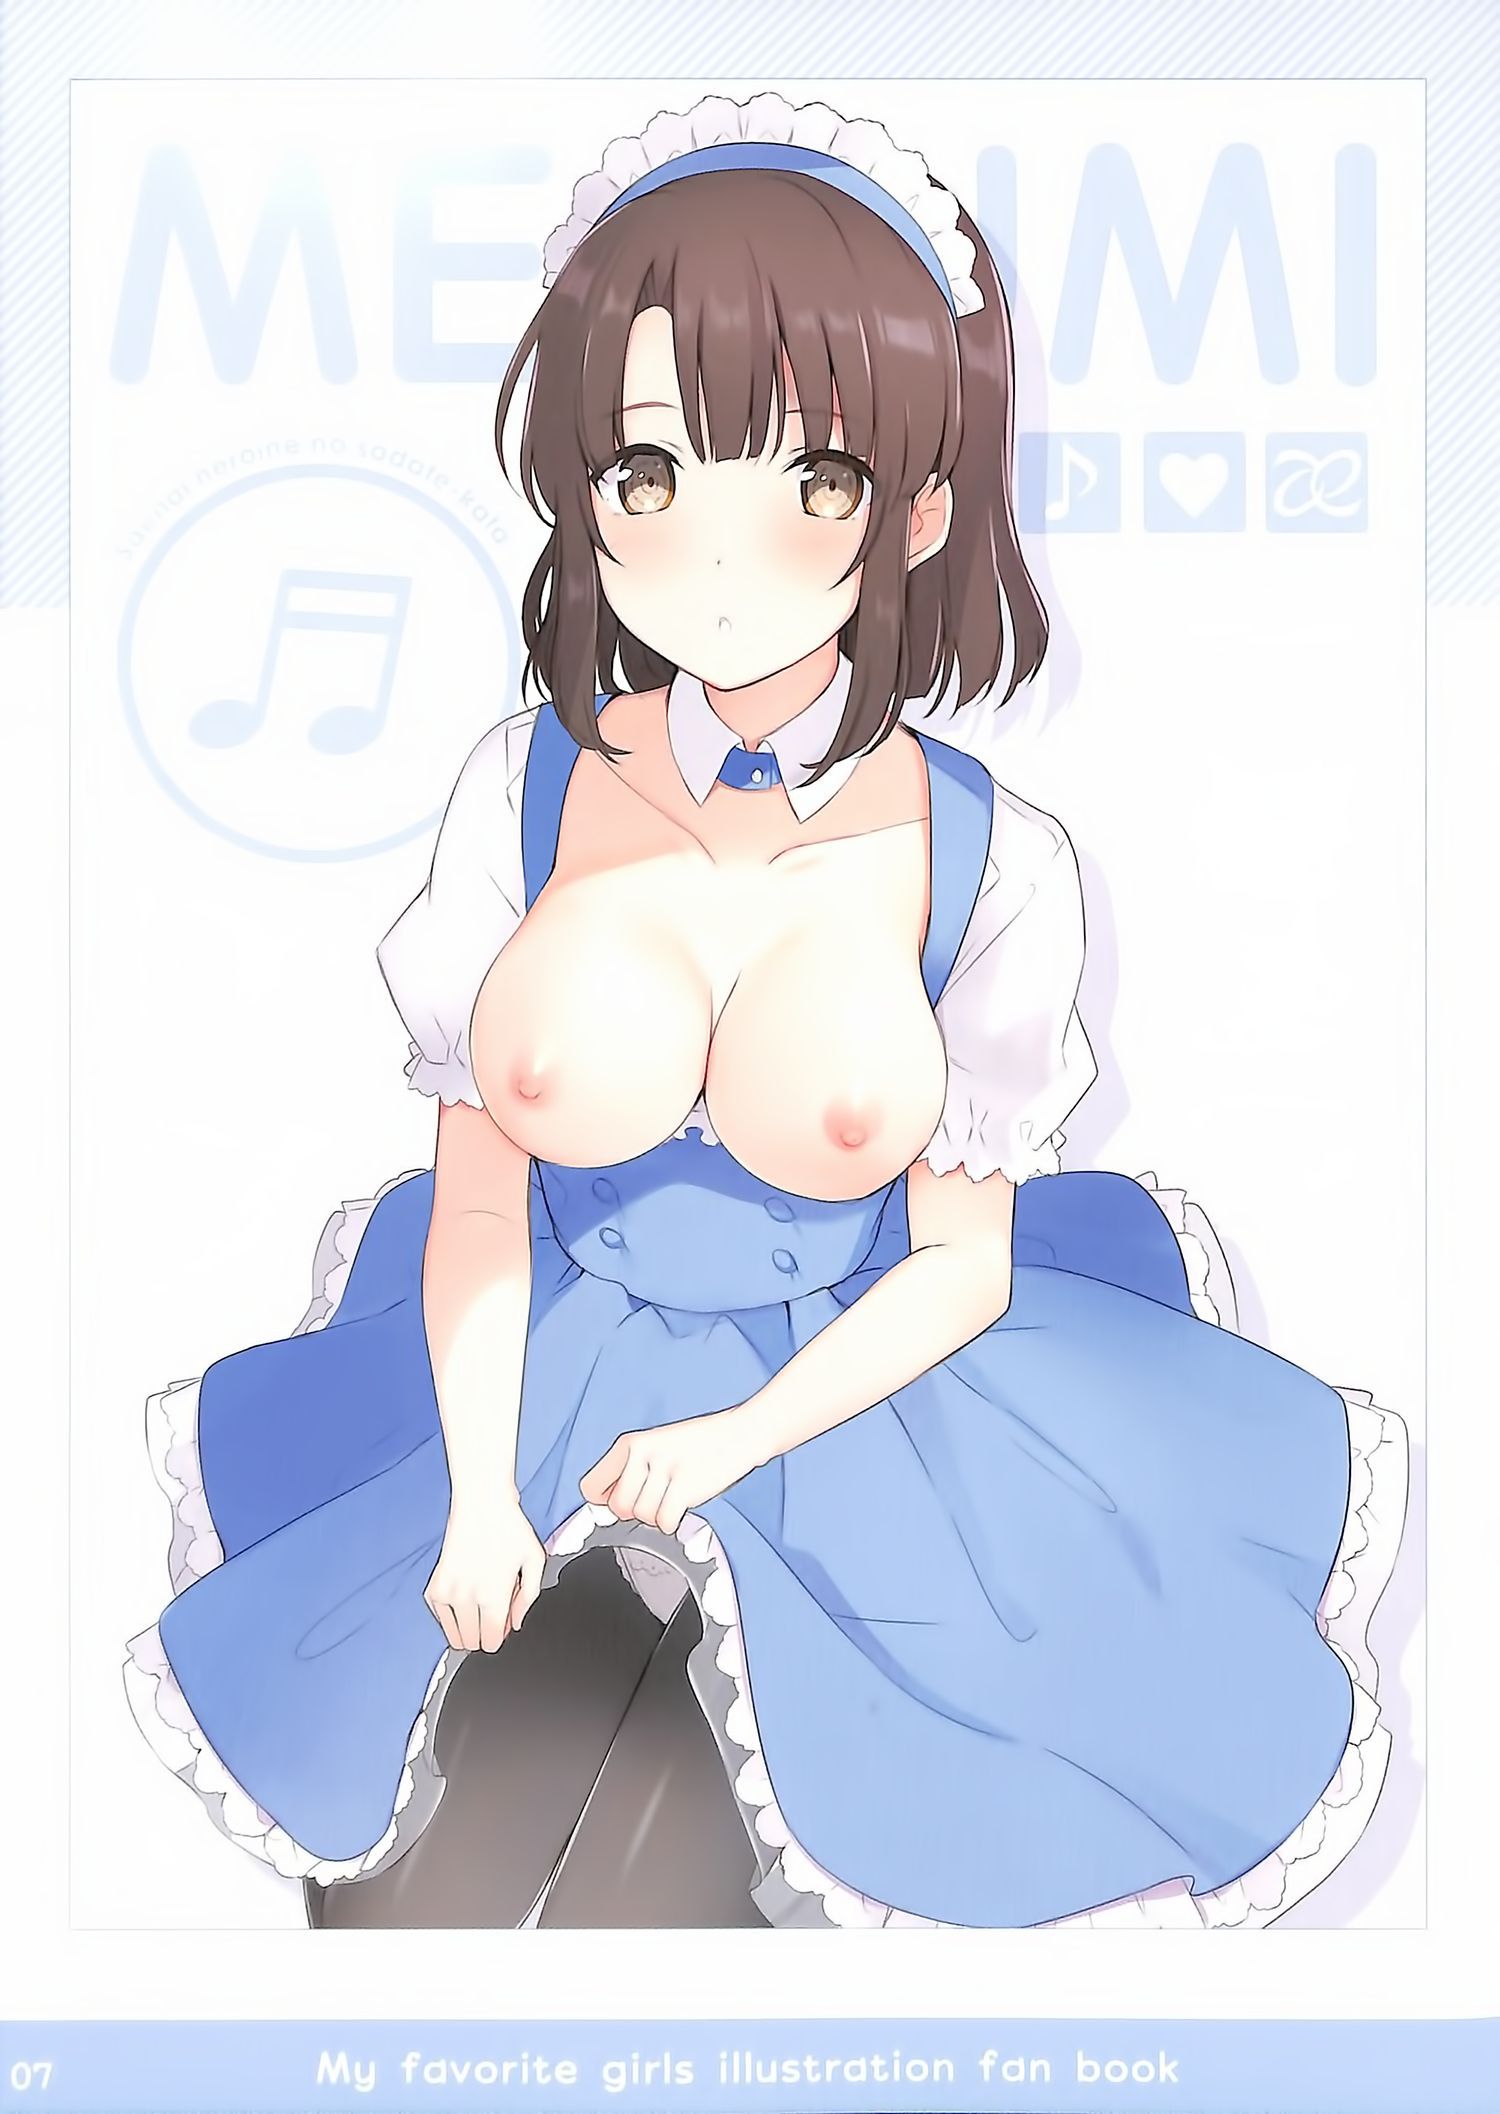 [Secondary ZIP] The second image of the maid wants you to serve naughty Girl 29